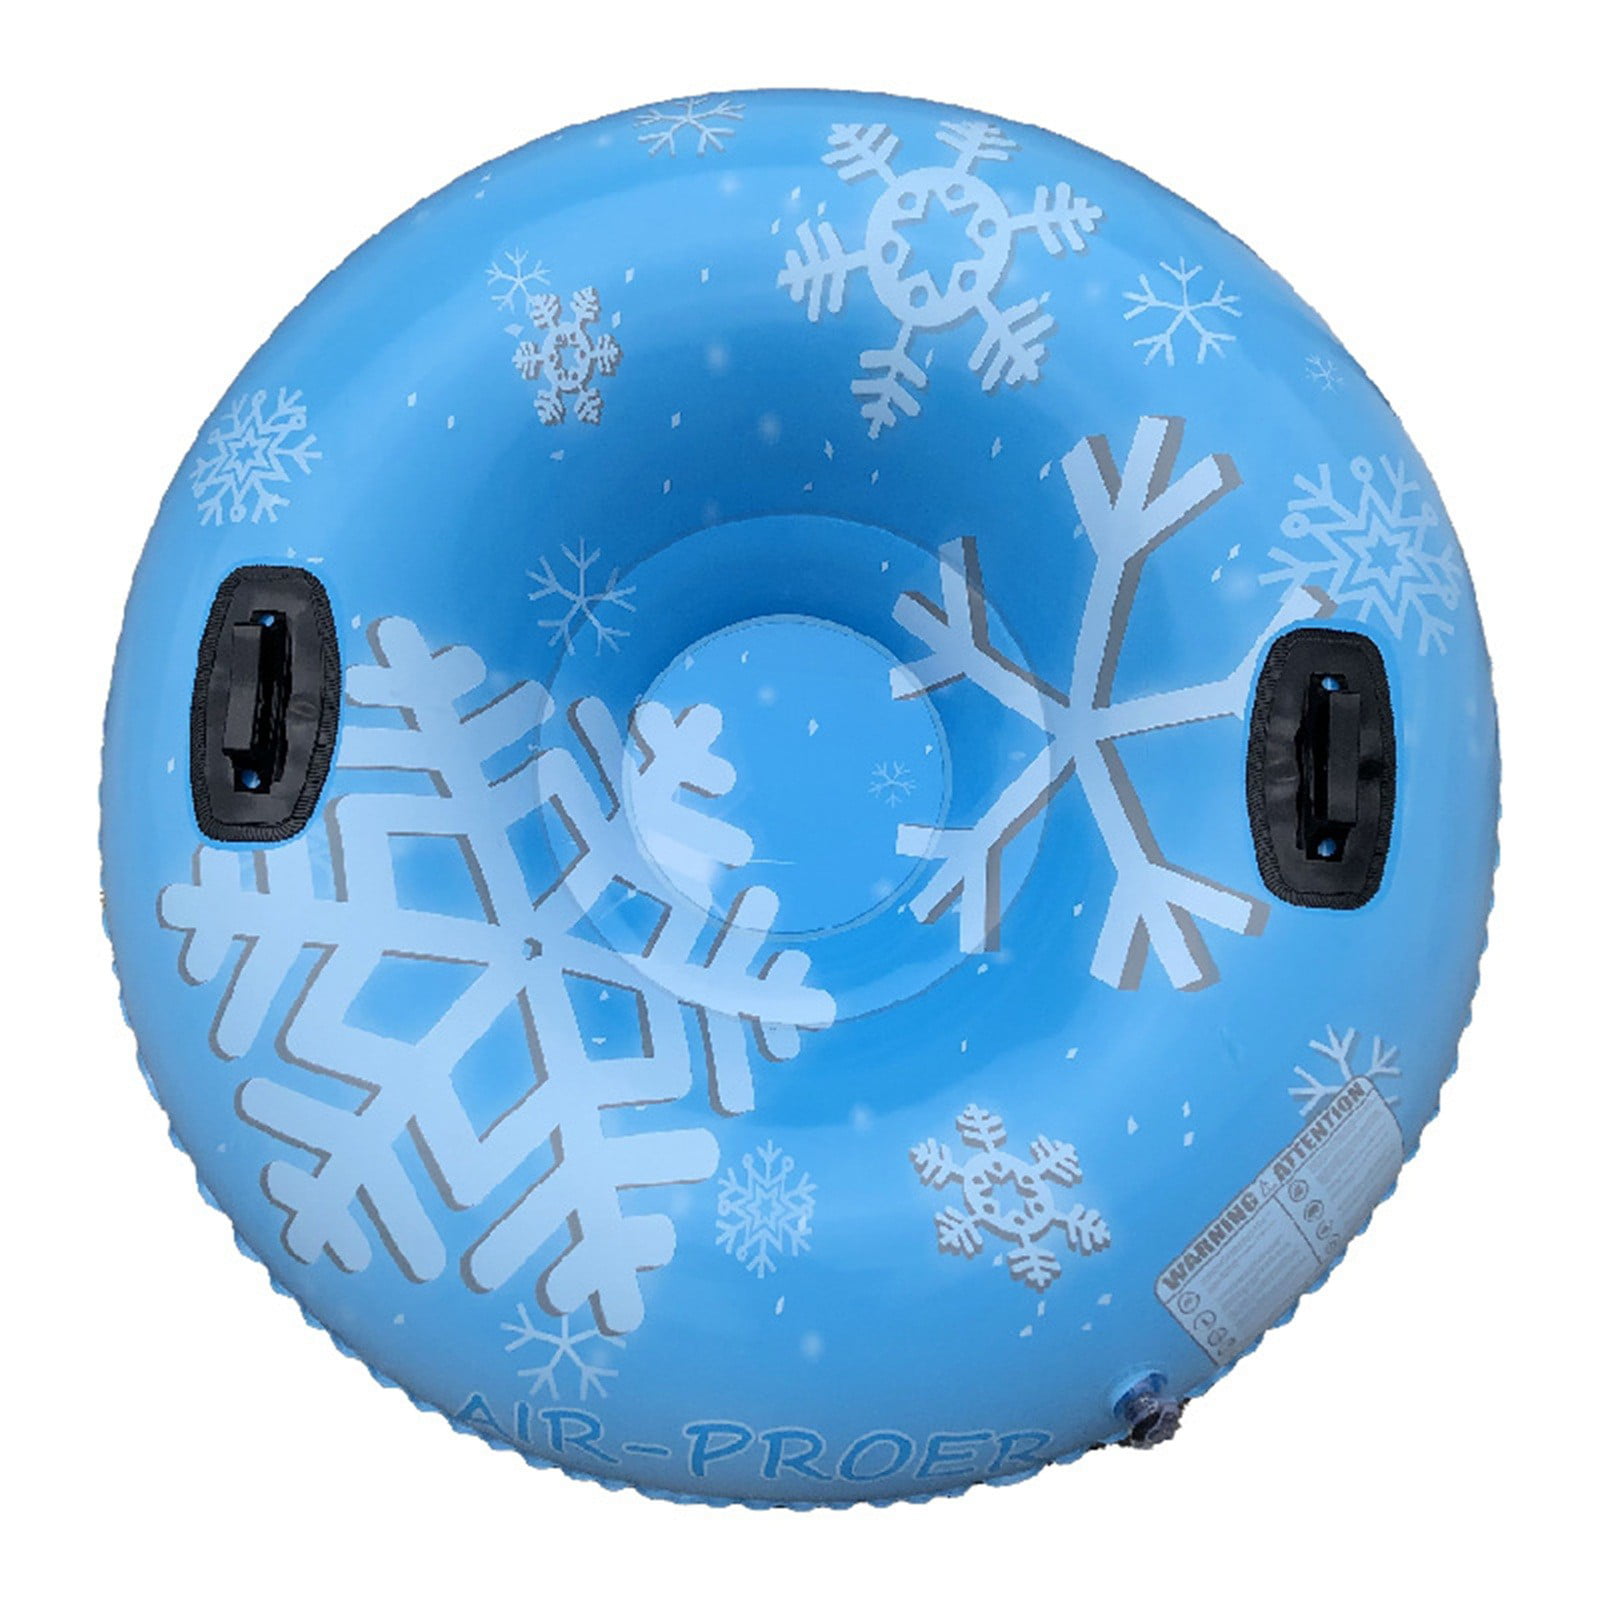 47 Inches Inflatable Snow Tube Heavy Duty Snow Sleds for Kids and Adults Snow Tube for Winter Fun Skiing Ring PVC Snow Sled Tire Tube for Kid Ski Pad Outdoor Sports with Handle 